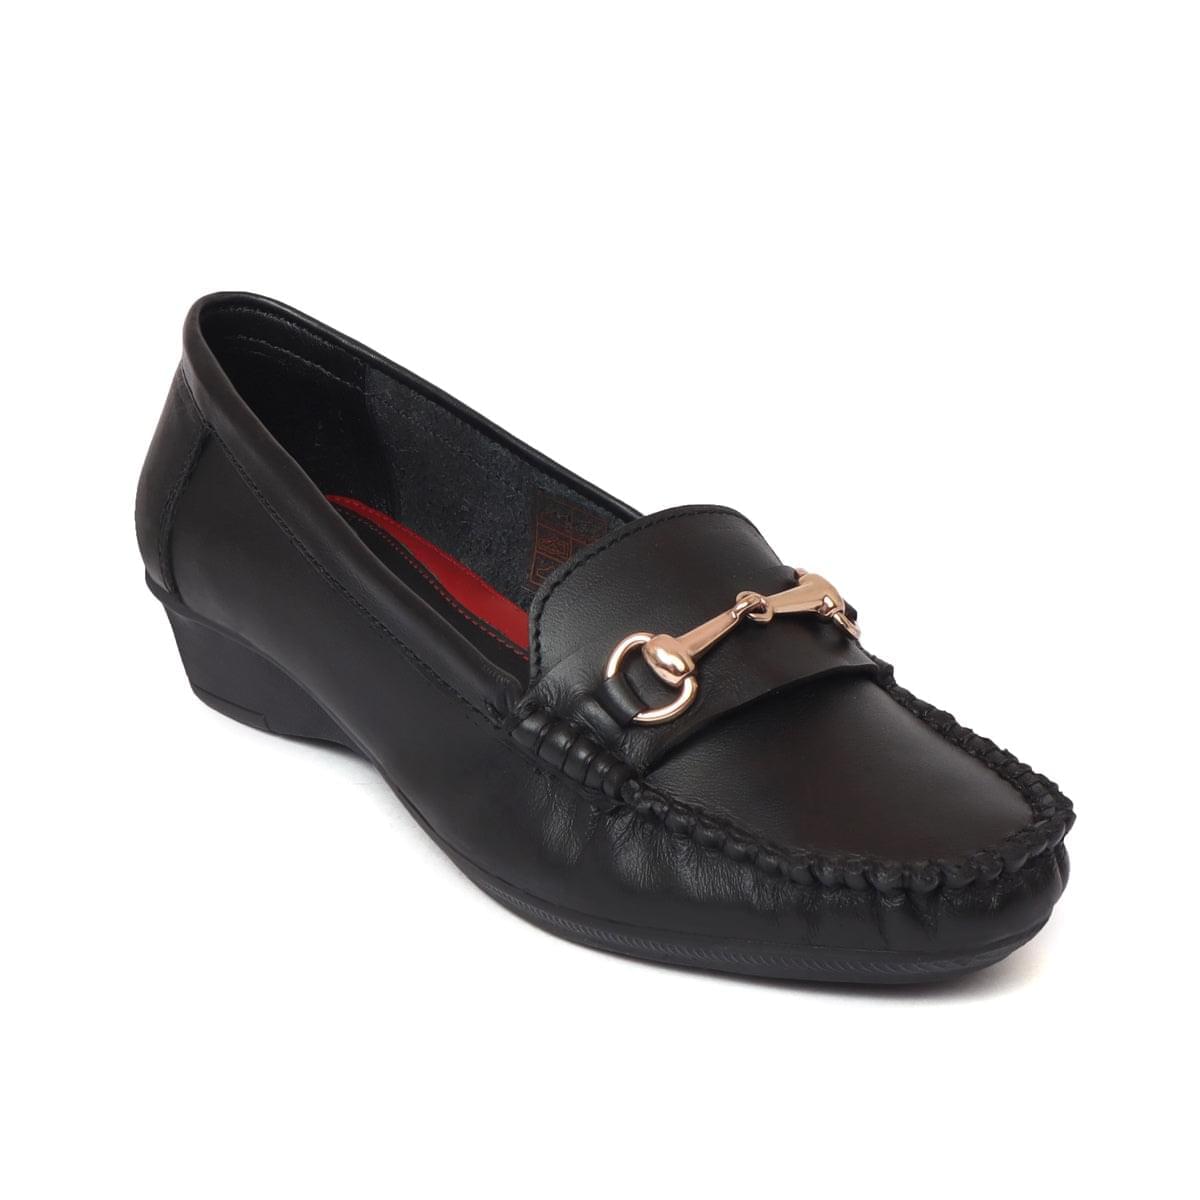 loafer formal shoes for women